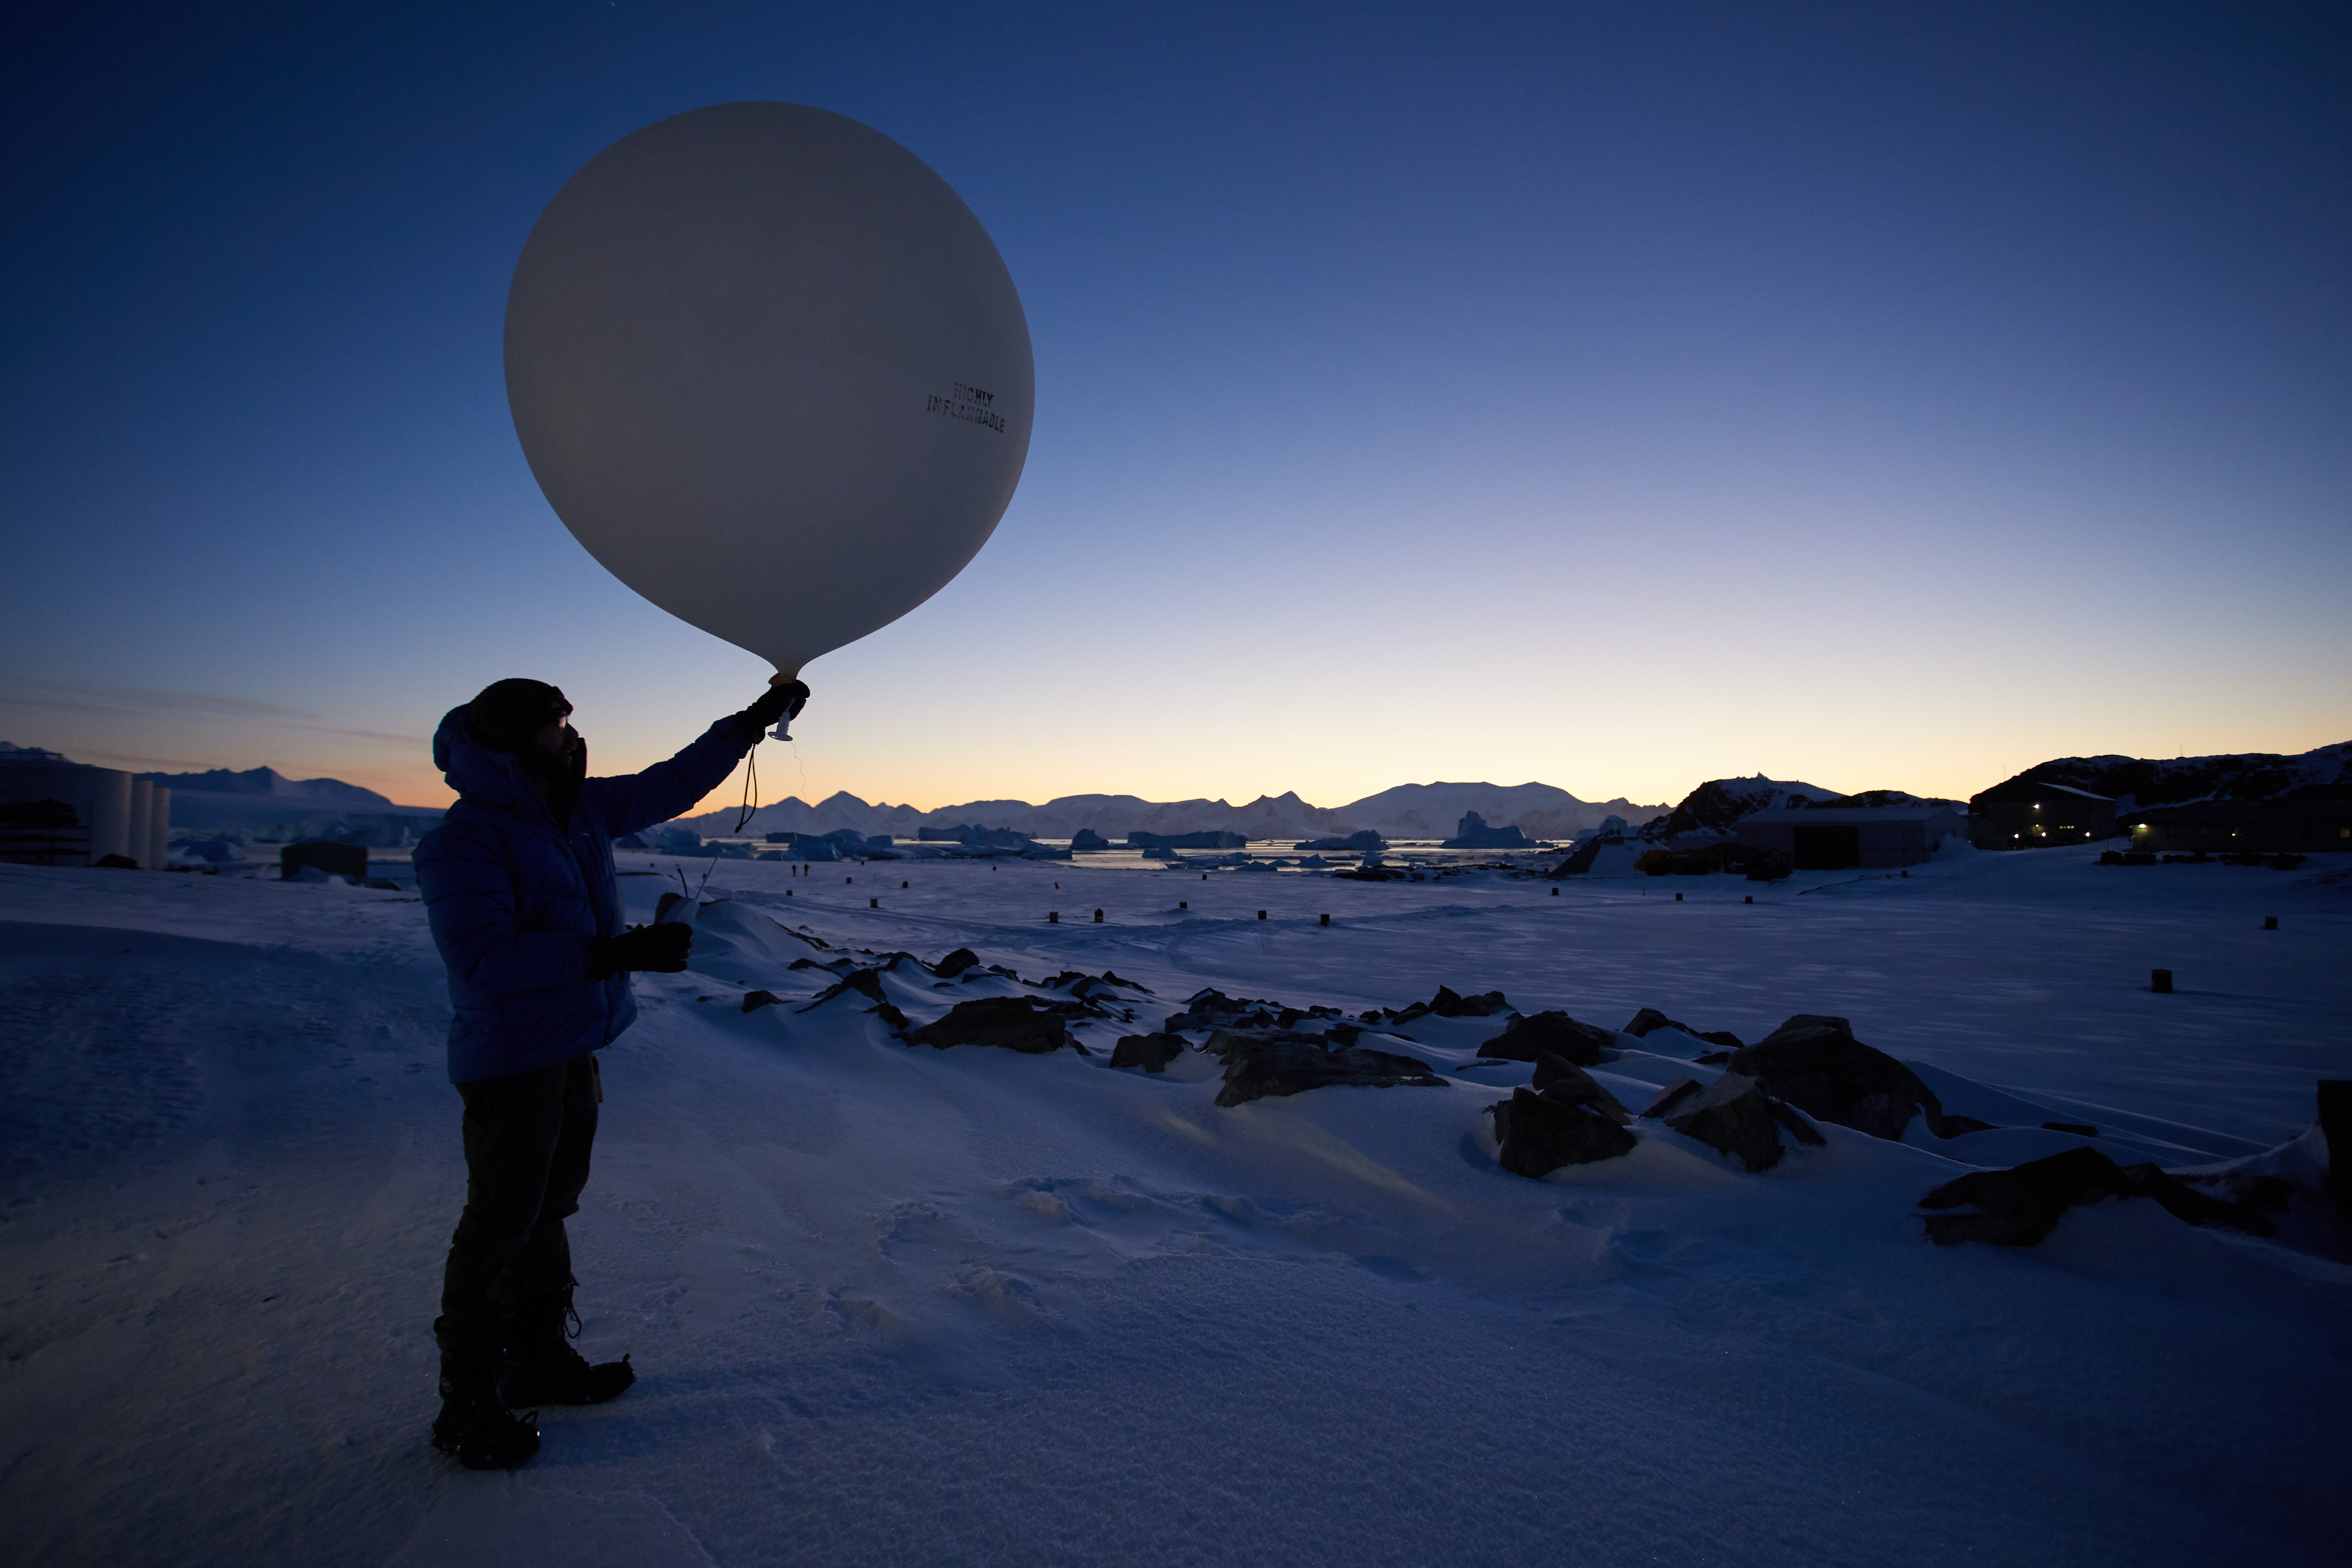 Launching a weather balloon and radiosonde in the Antarctic